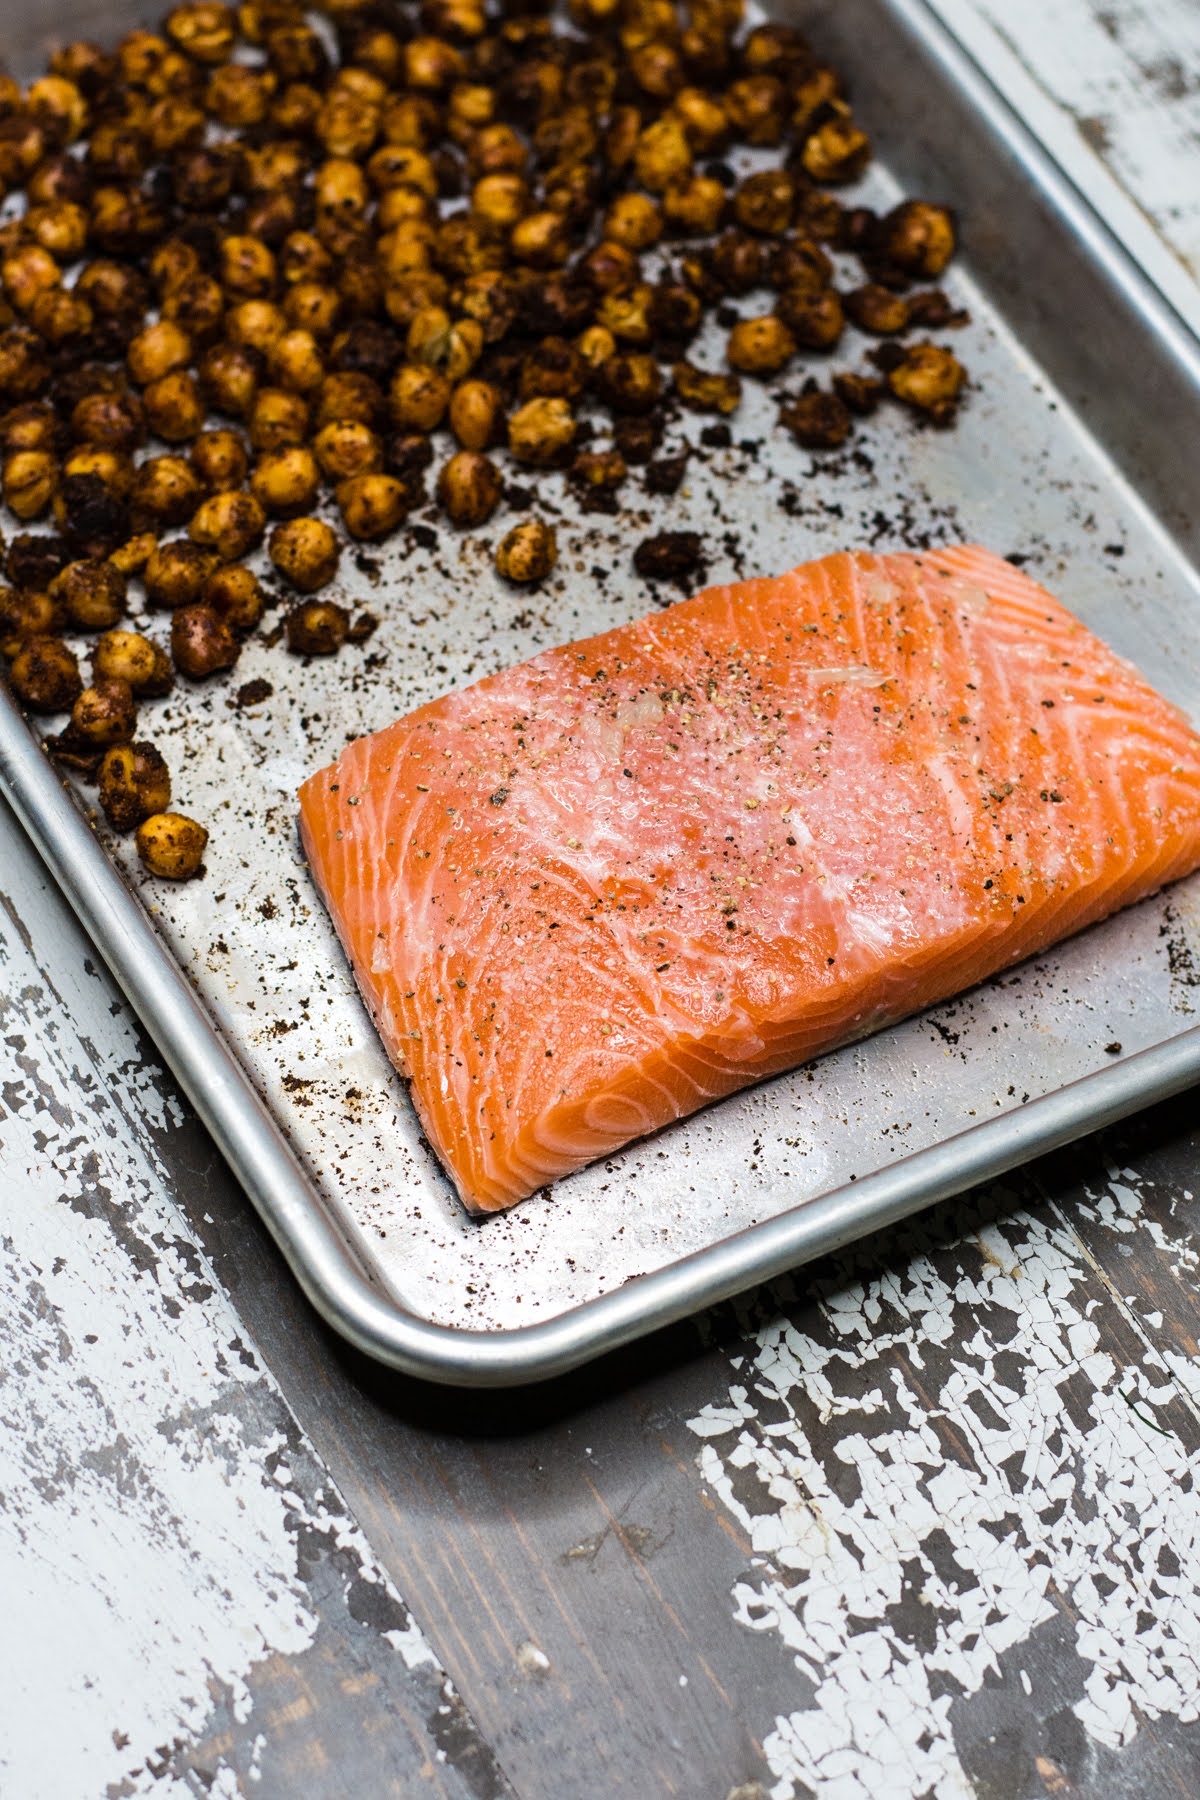 A filet of salmon on a sheet pan with roasted chickpeas.